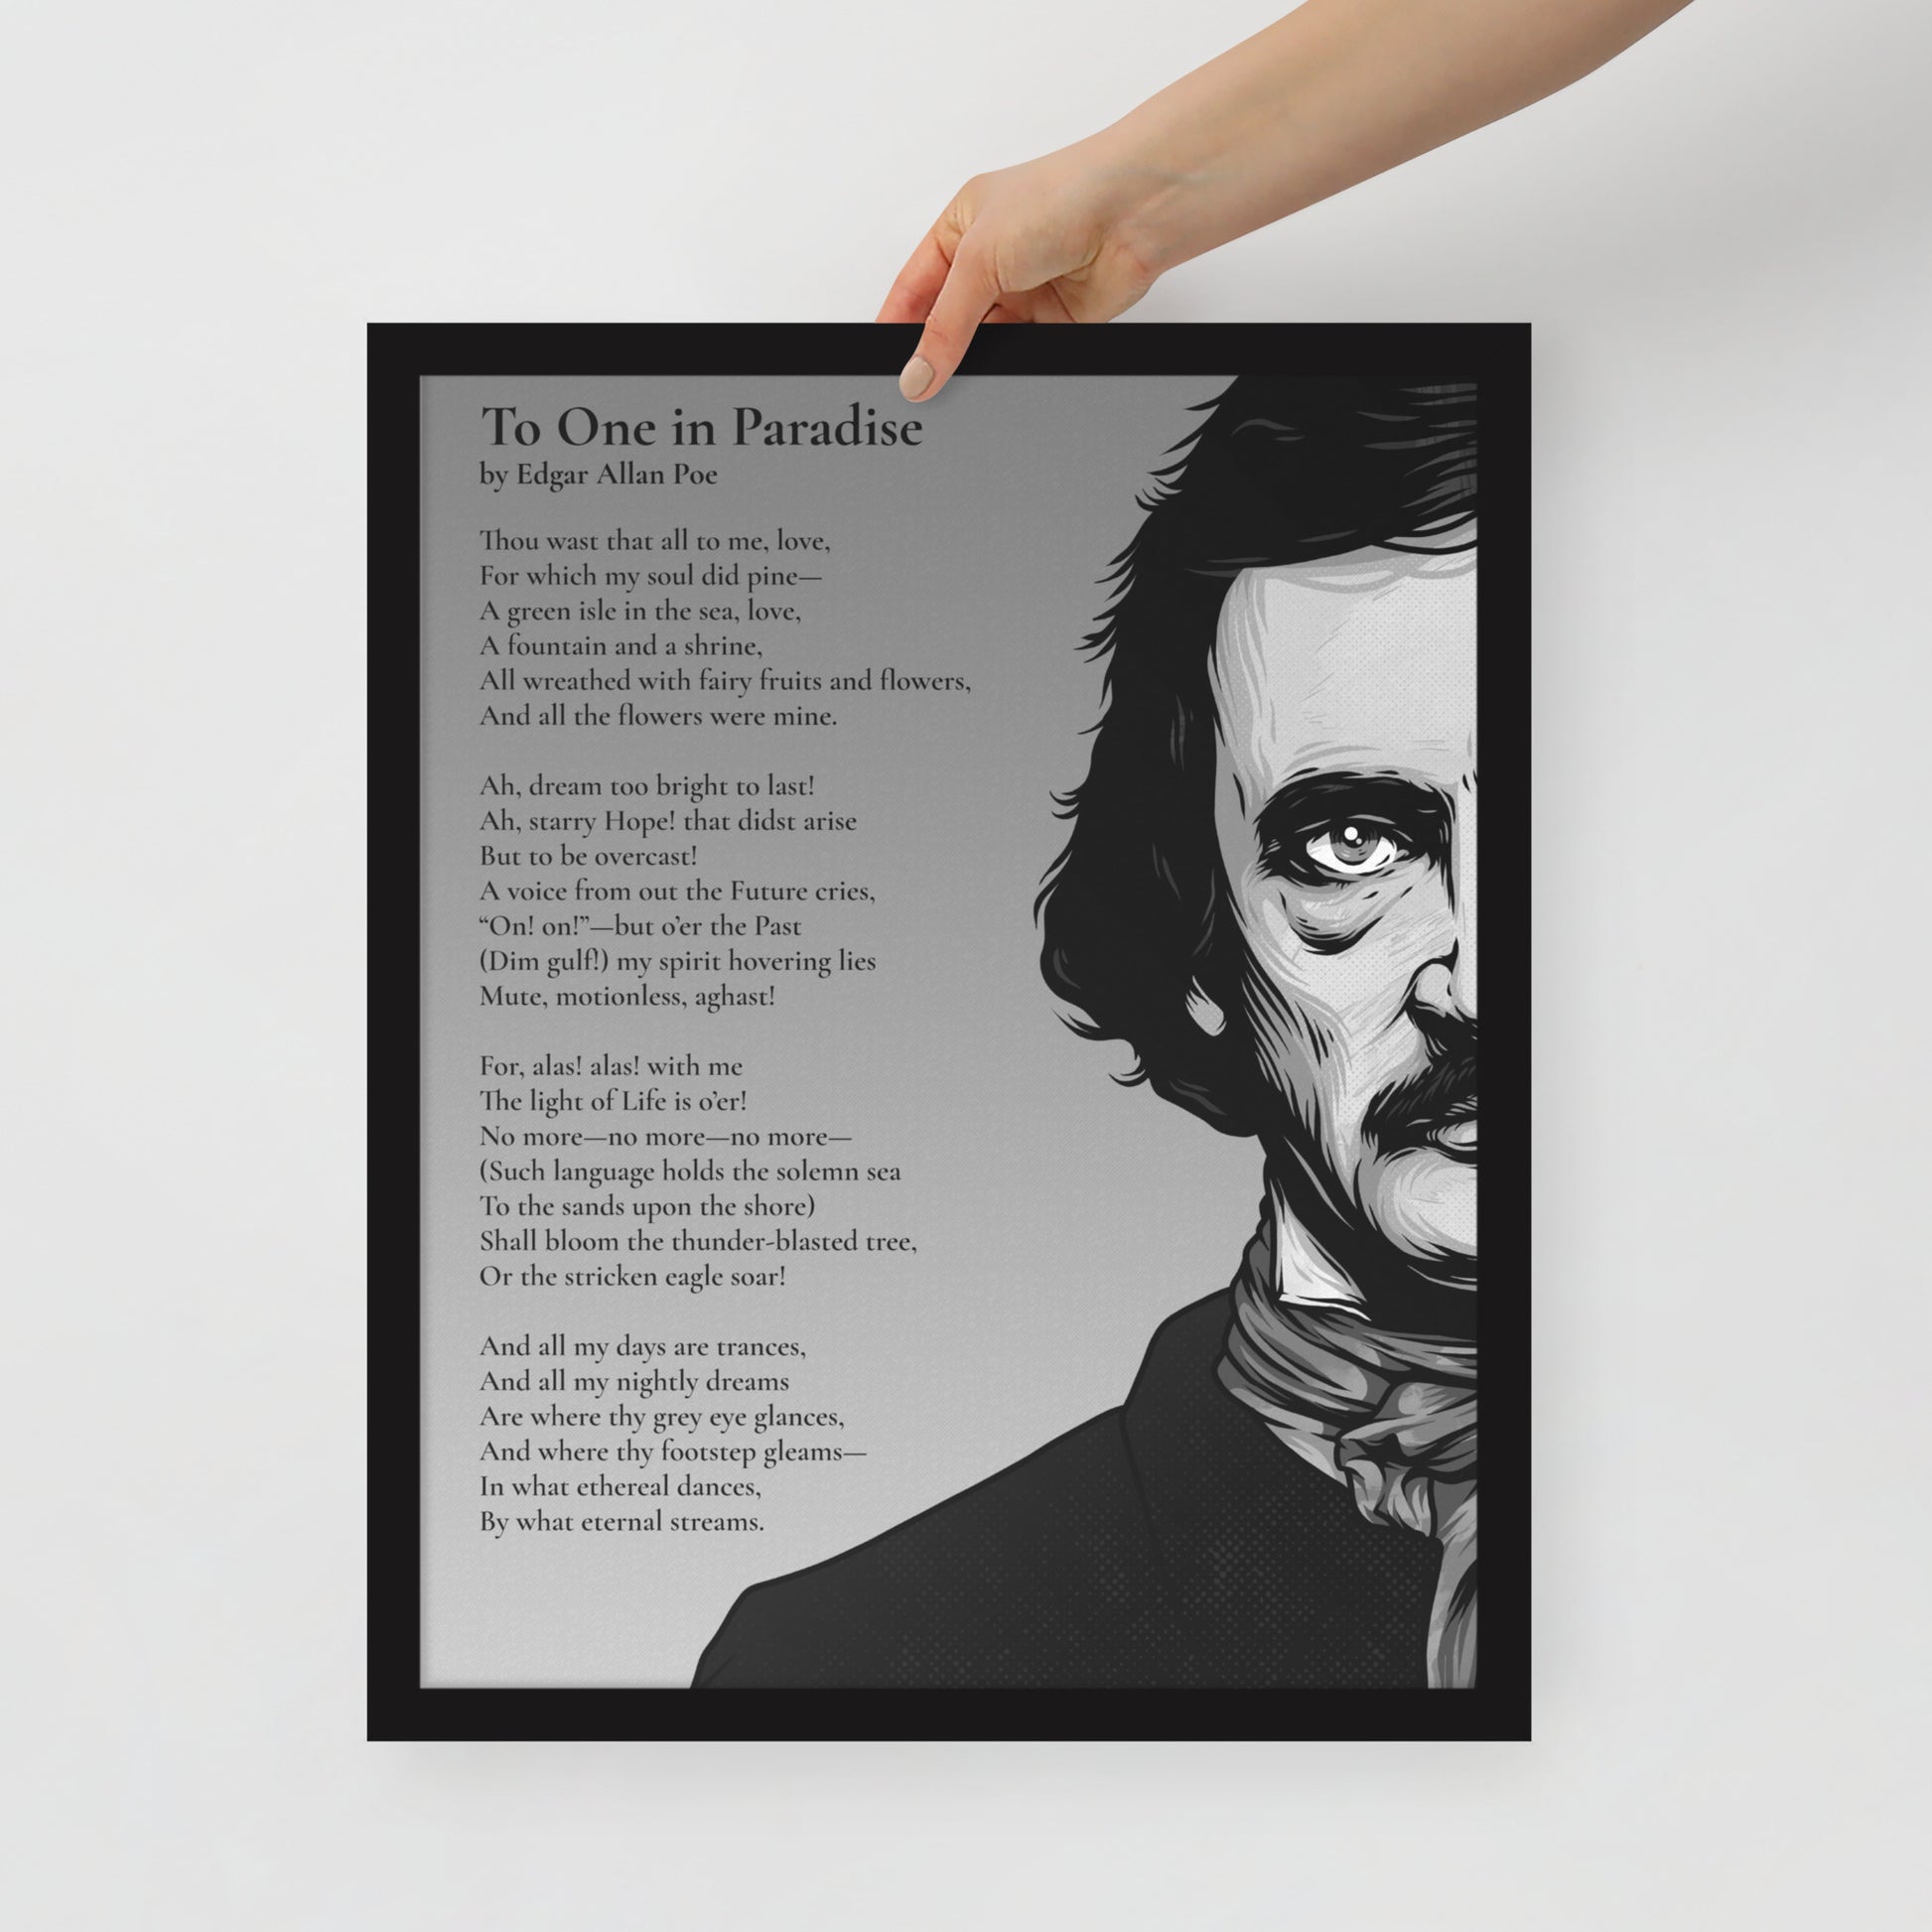 Edgar Allan Poe's 'To One in Paradise' Framed Matted Poster - 16 x 20 Black Frame